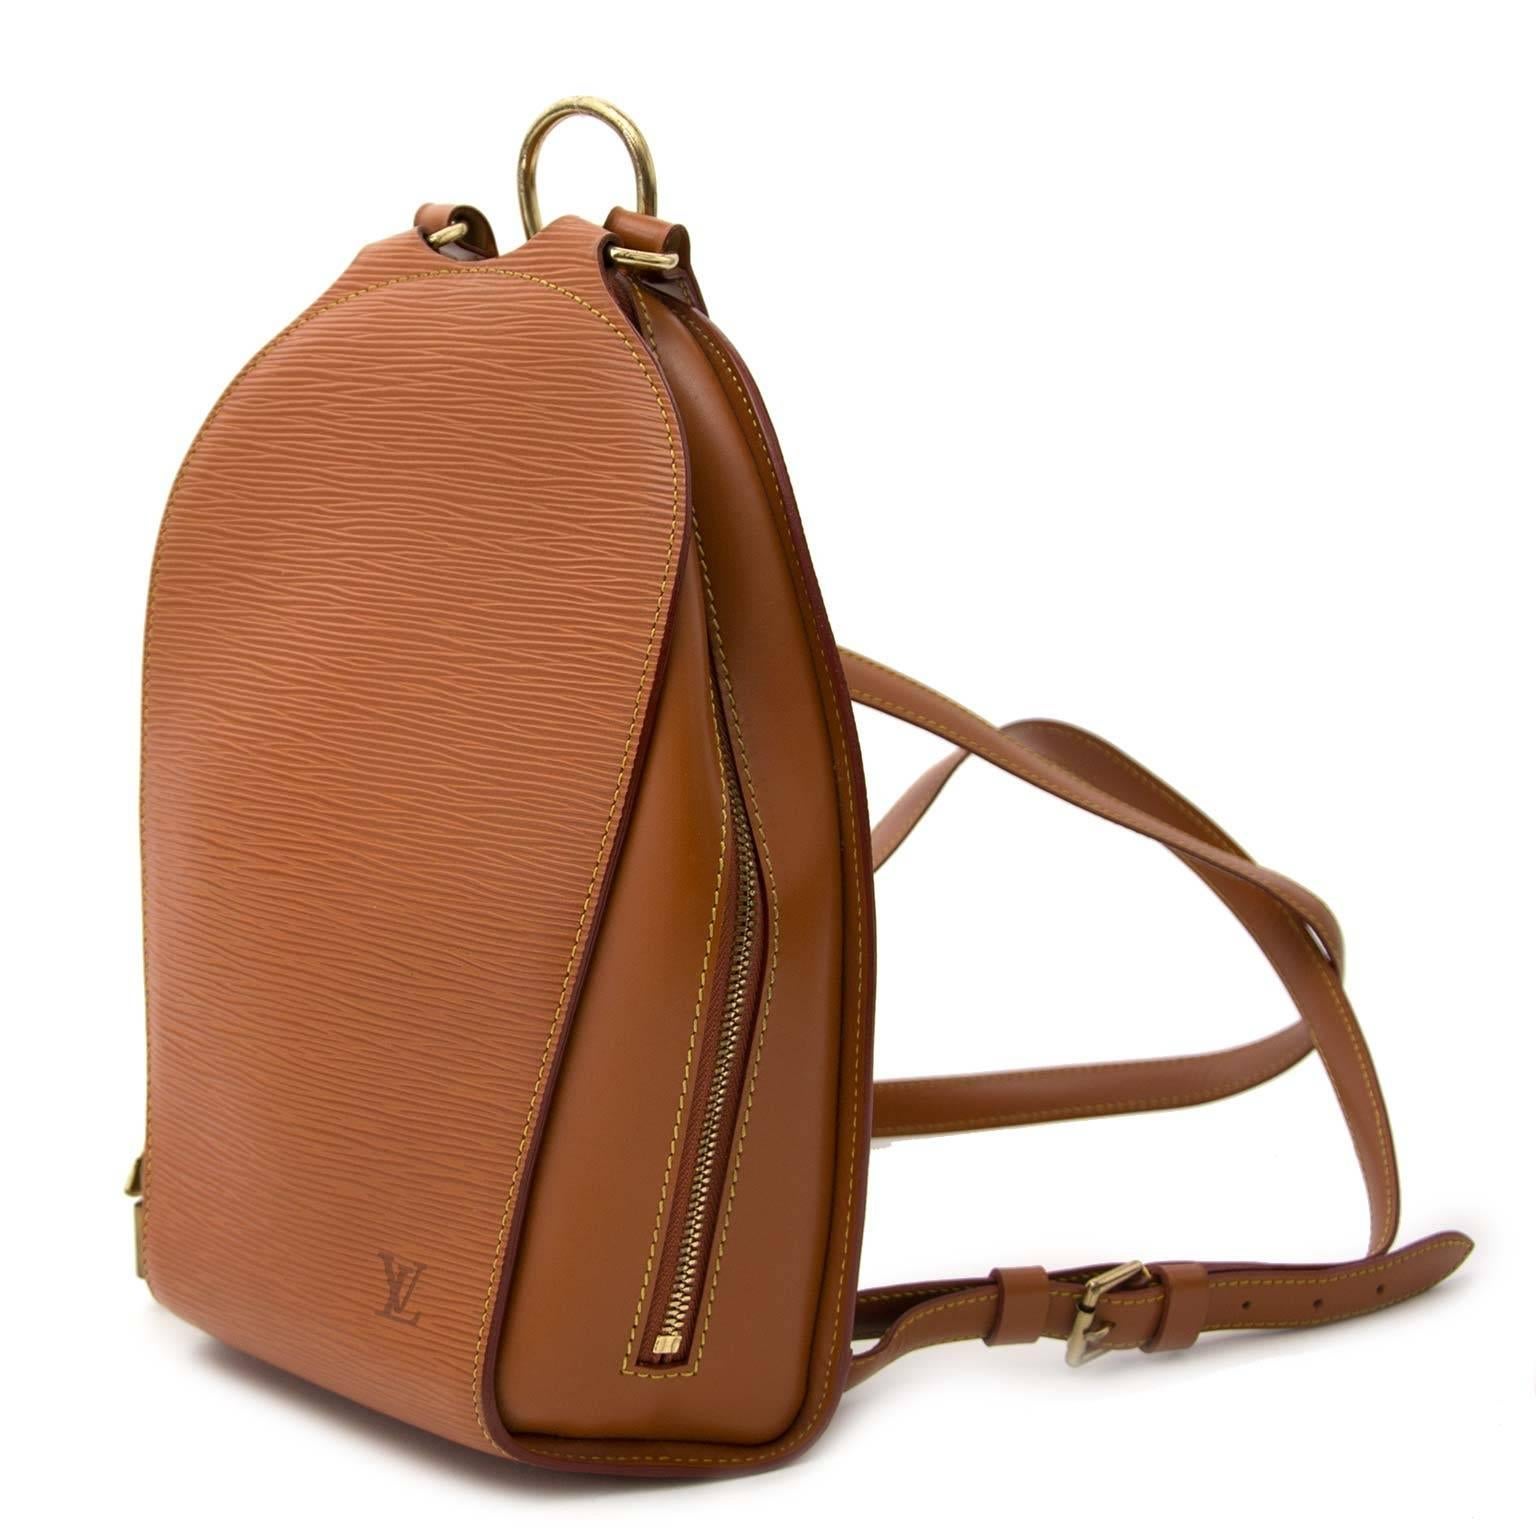 Very Good Conditoin

Louis Vuitton Mabillon Backpack

Charming Louis Vuitton Mabillon backpack in caramel epi leather.

Double adjustable strap in brown leather allowing the bag to be worn on the back.
The practical double zipper opens to a spacious